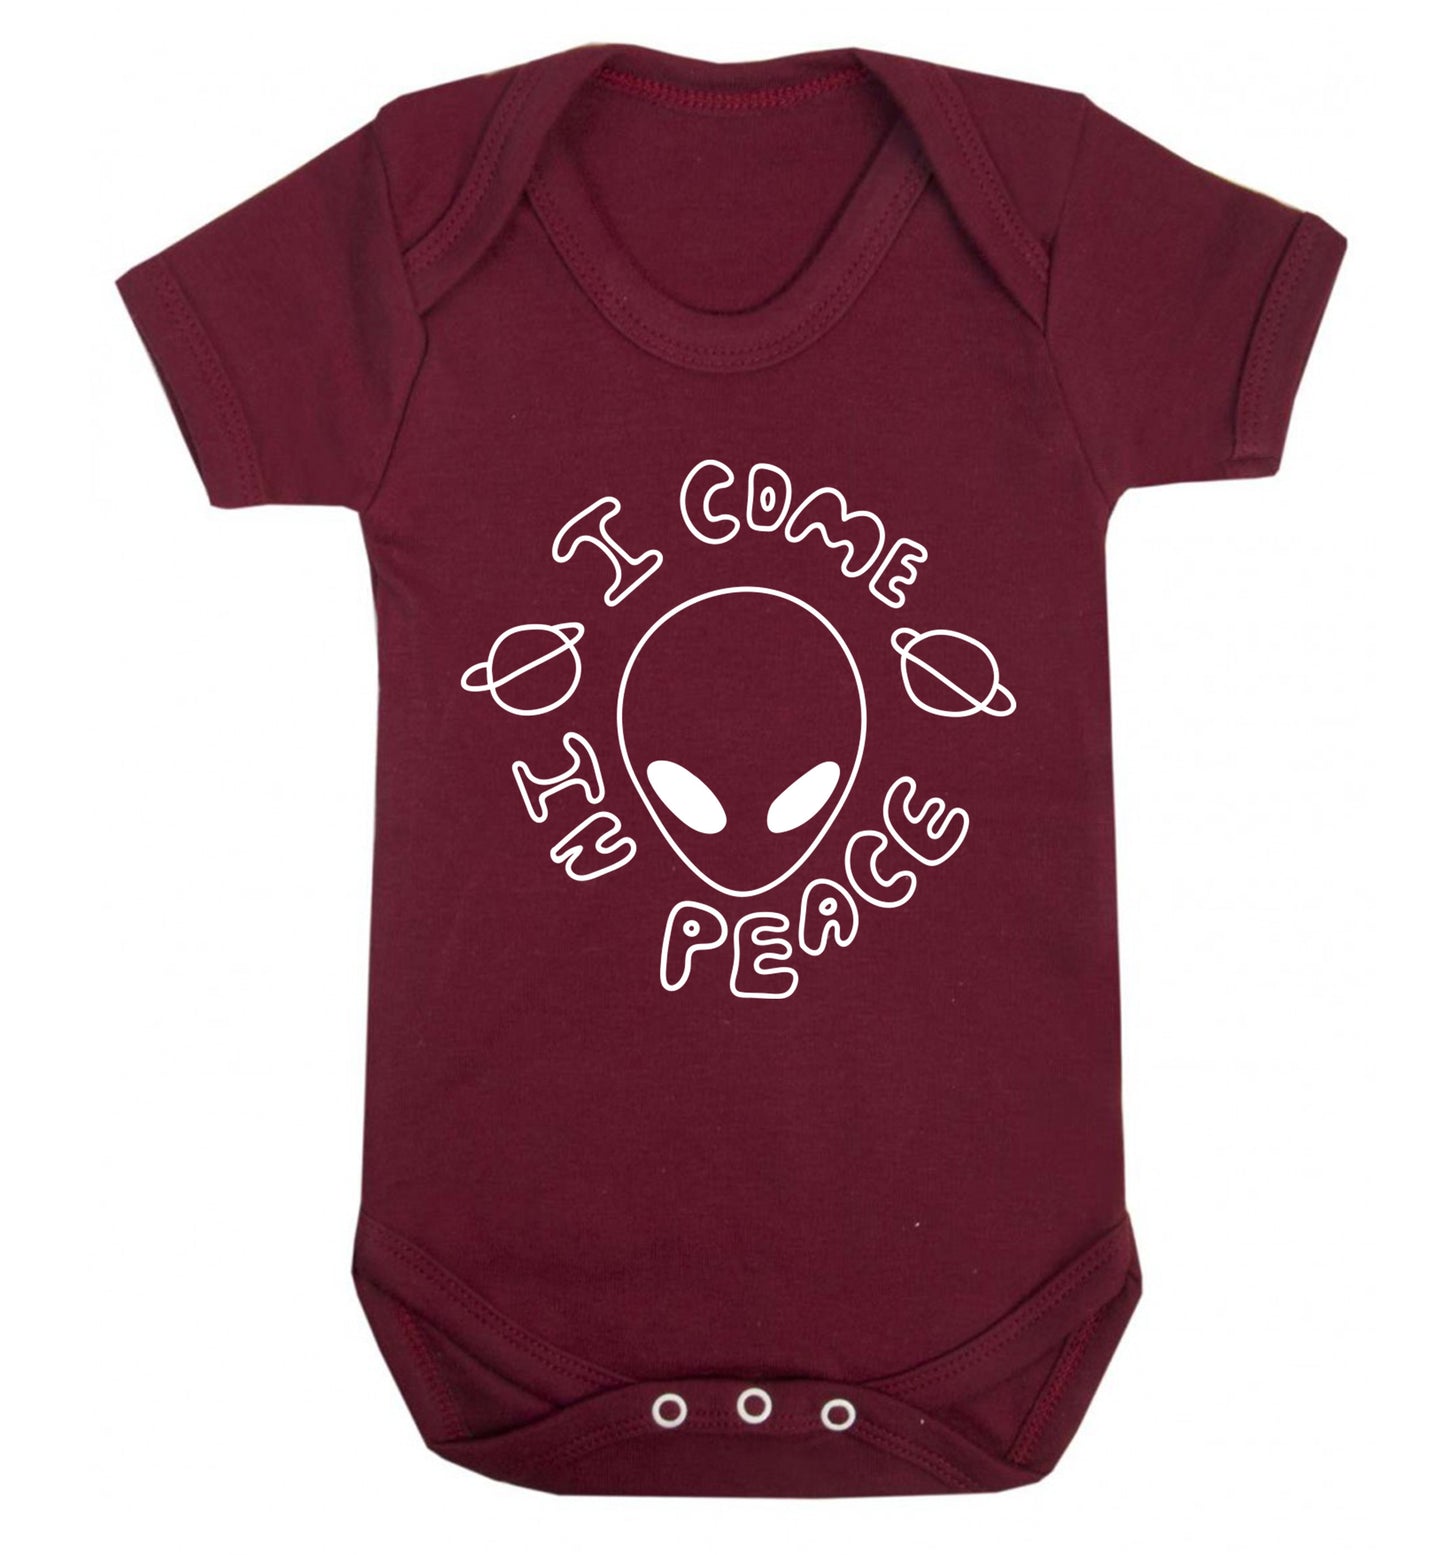 I come in peace Baby Vest maroon 18-24 months